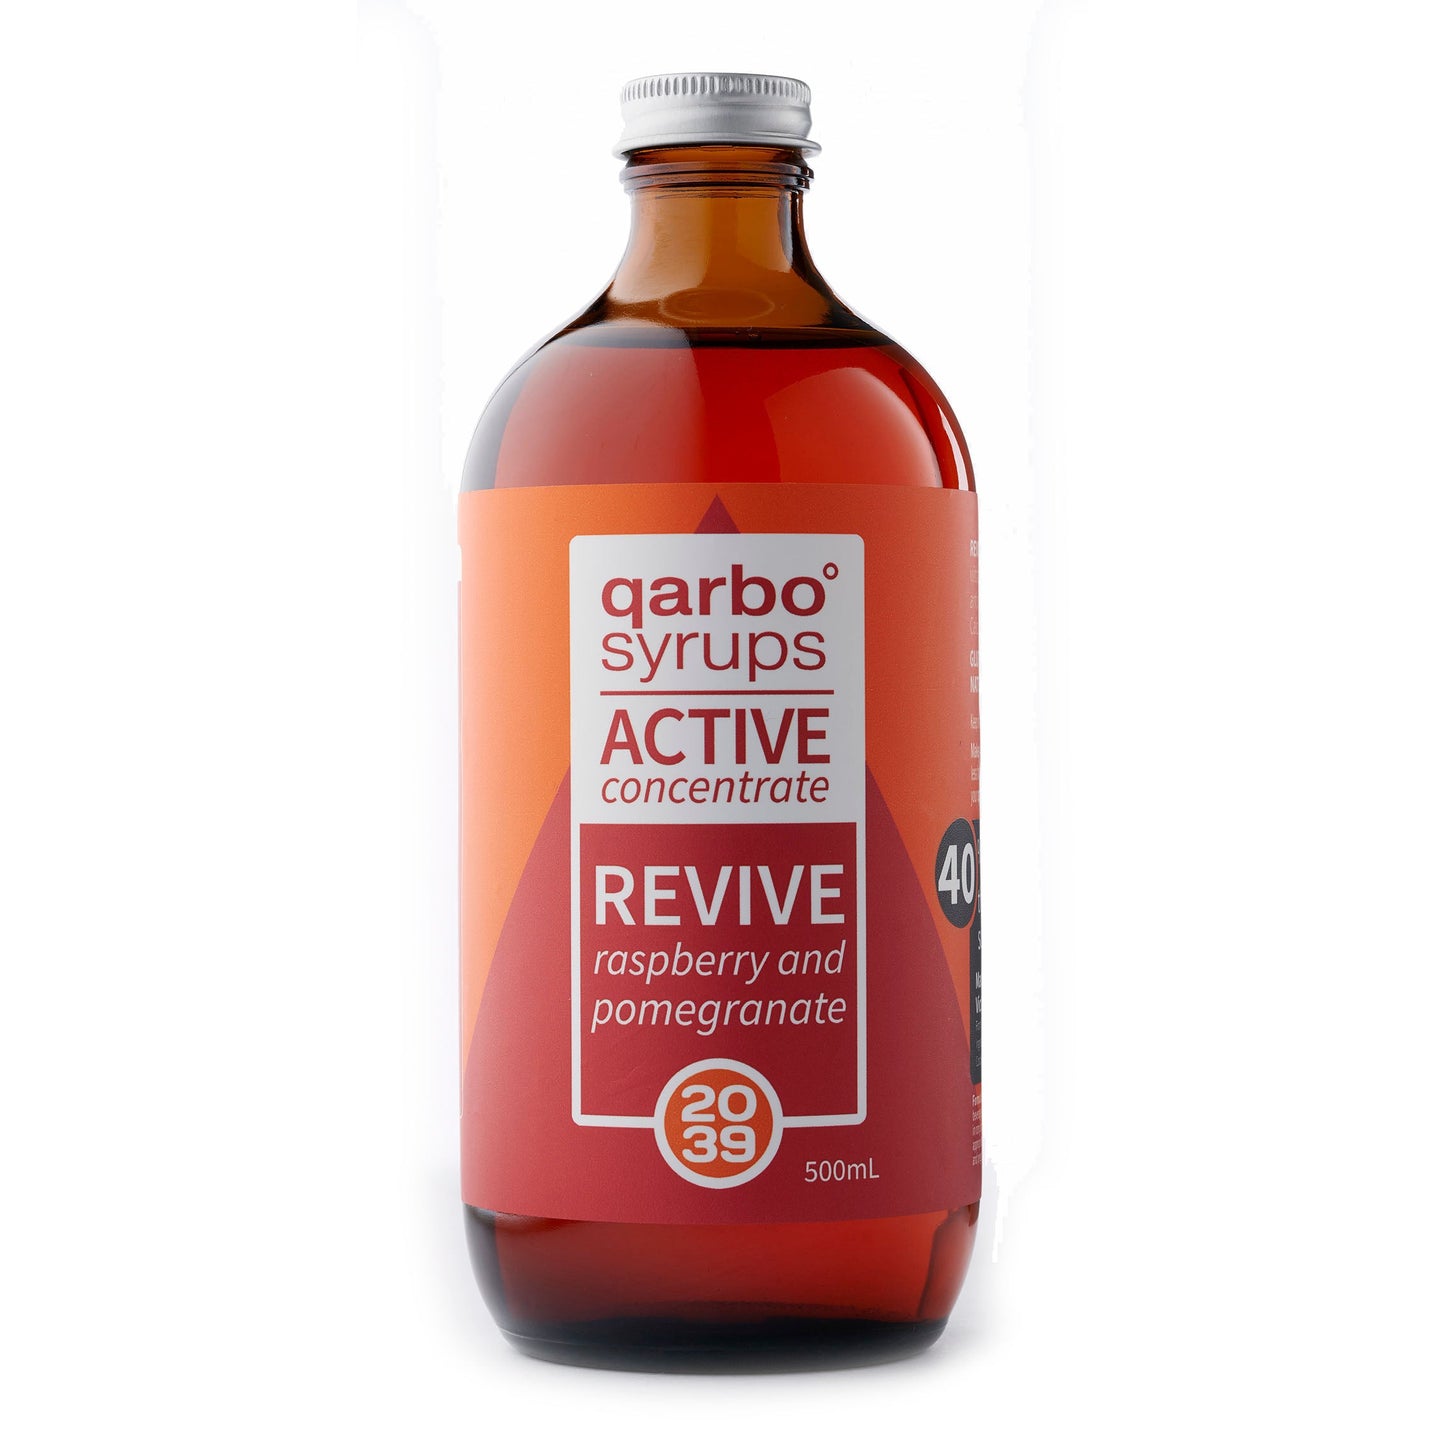 qarbo˚syrups - REVIVE - raspberry and pomegranate